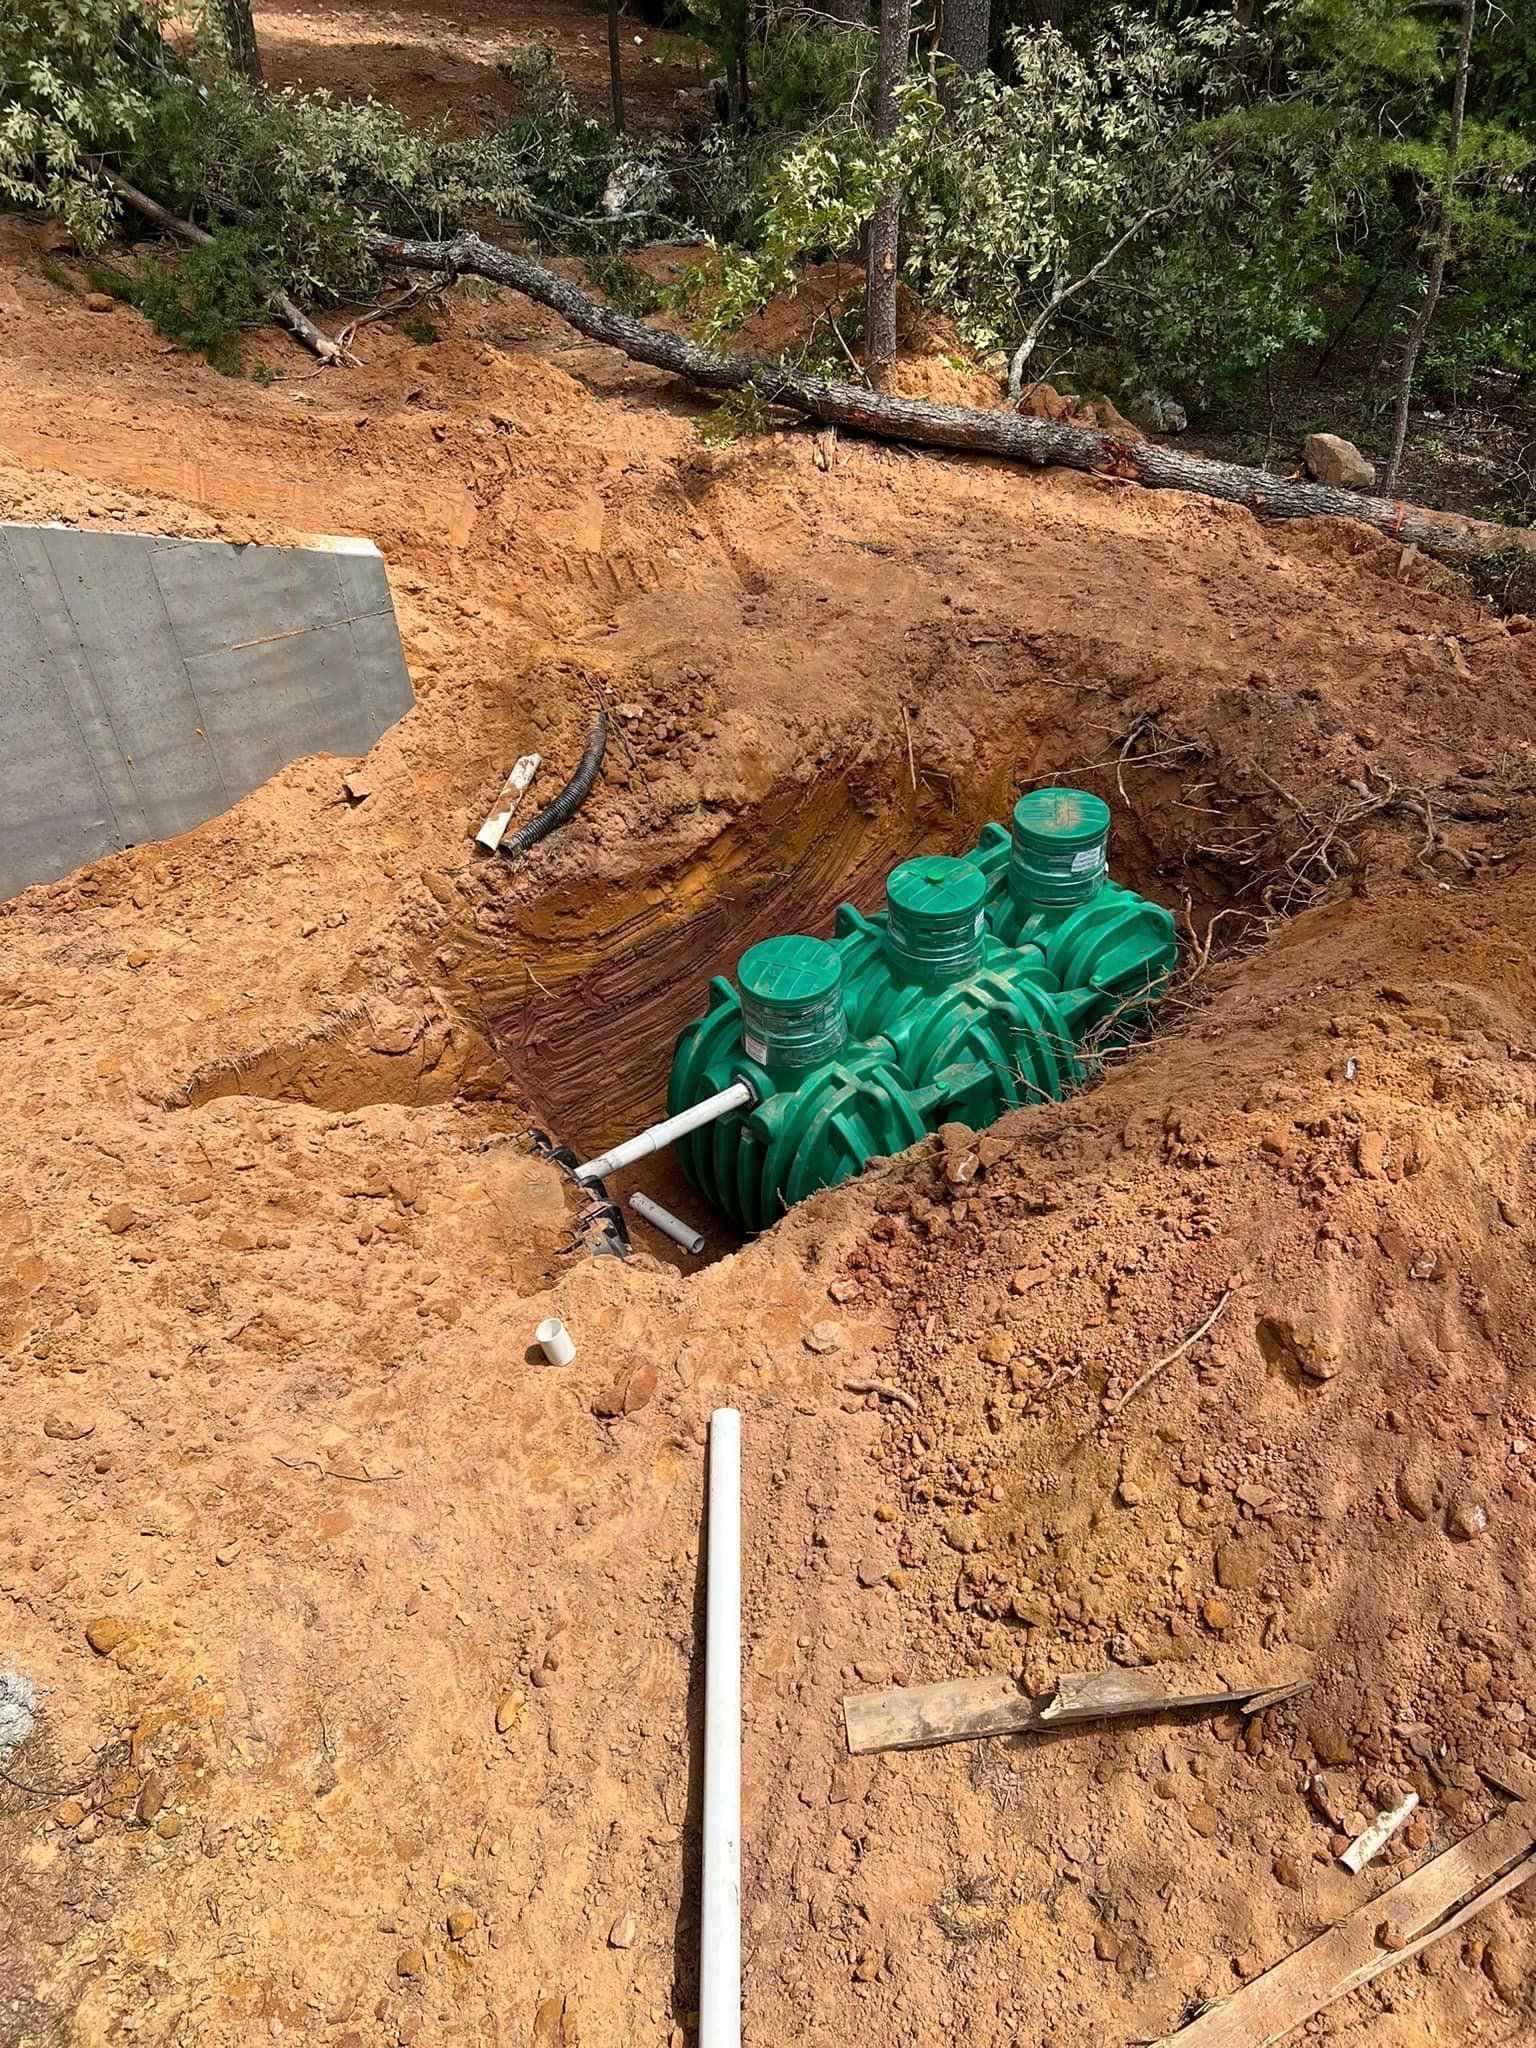 a green septic tank is sitting in a hole in the dirt .